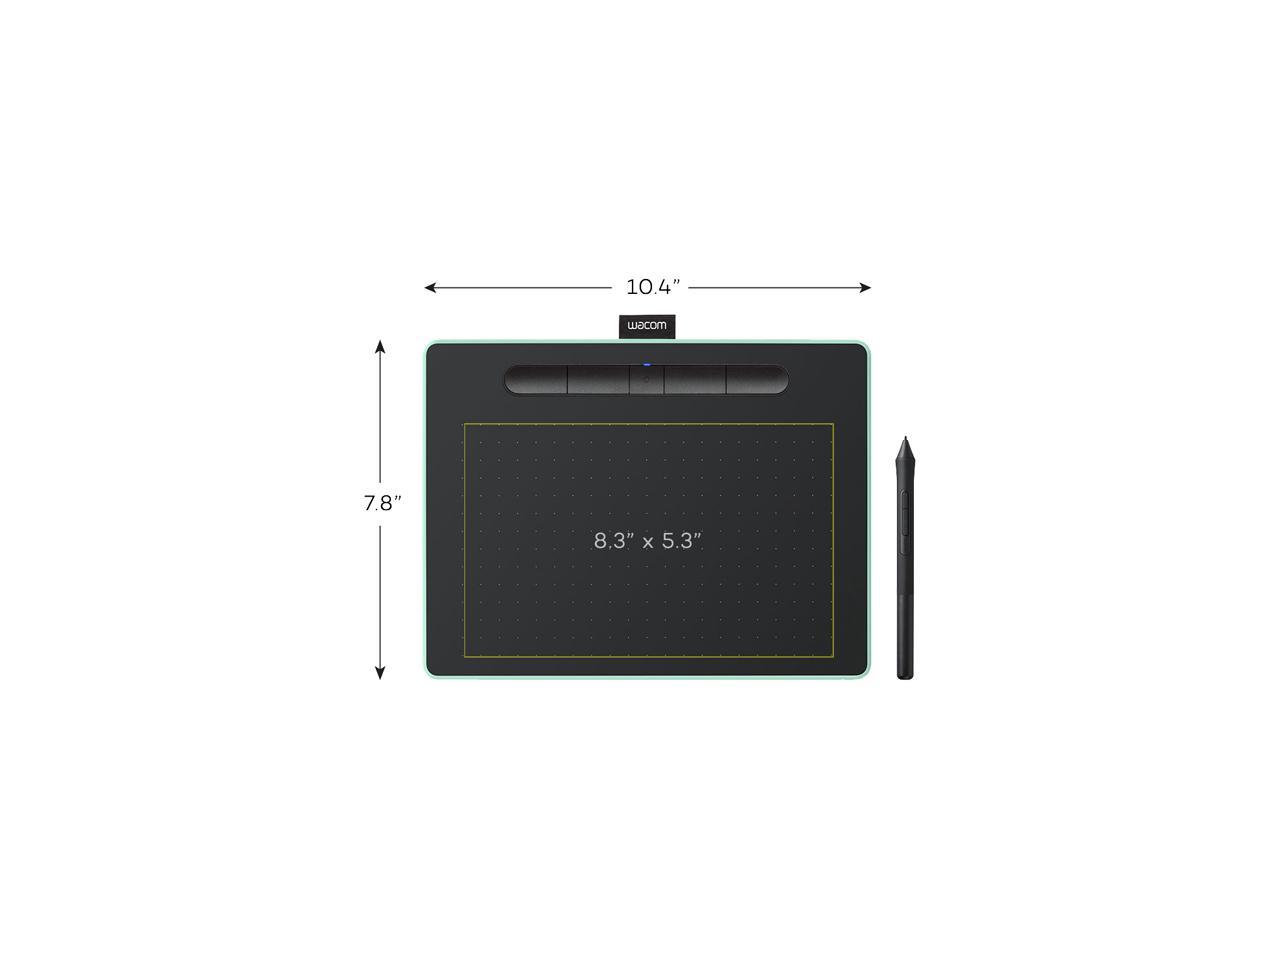 10.4 x 7.8 Black with Pistachio Accent Wacom Intuos Wireless Graphic Tablet with 3 Bonus Software Included CTL6100WLE0 